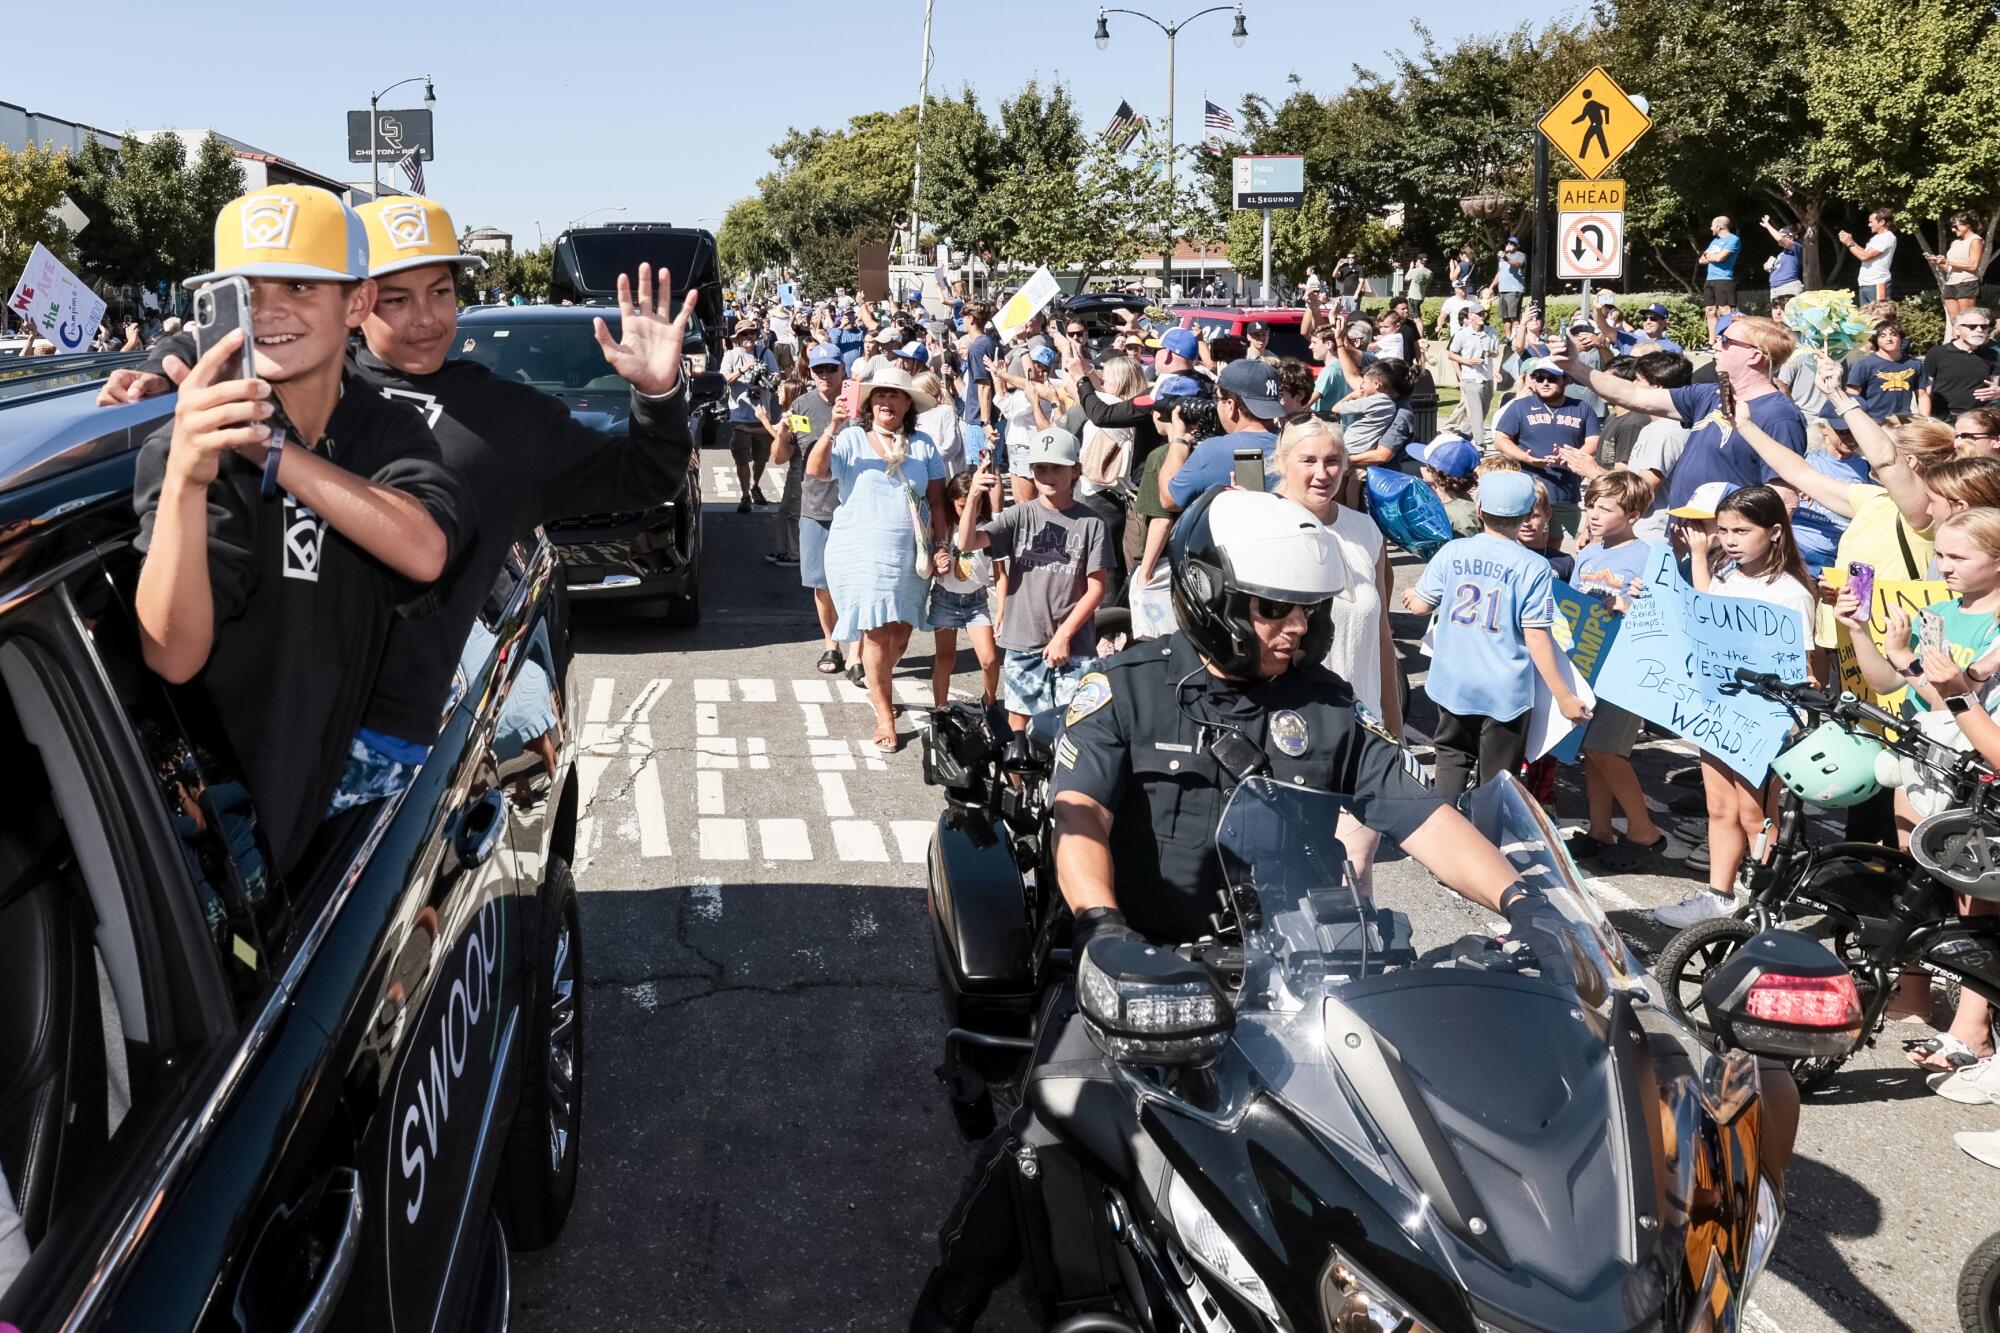 A cheering crowd surrounds black SUVs holding boys in baseball caps. A motorcycle officer polices the crowd.